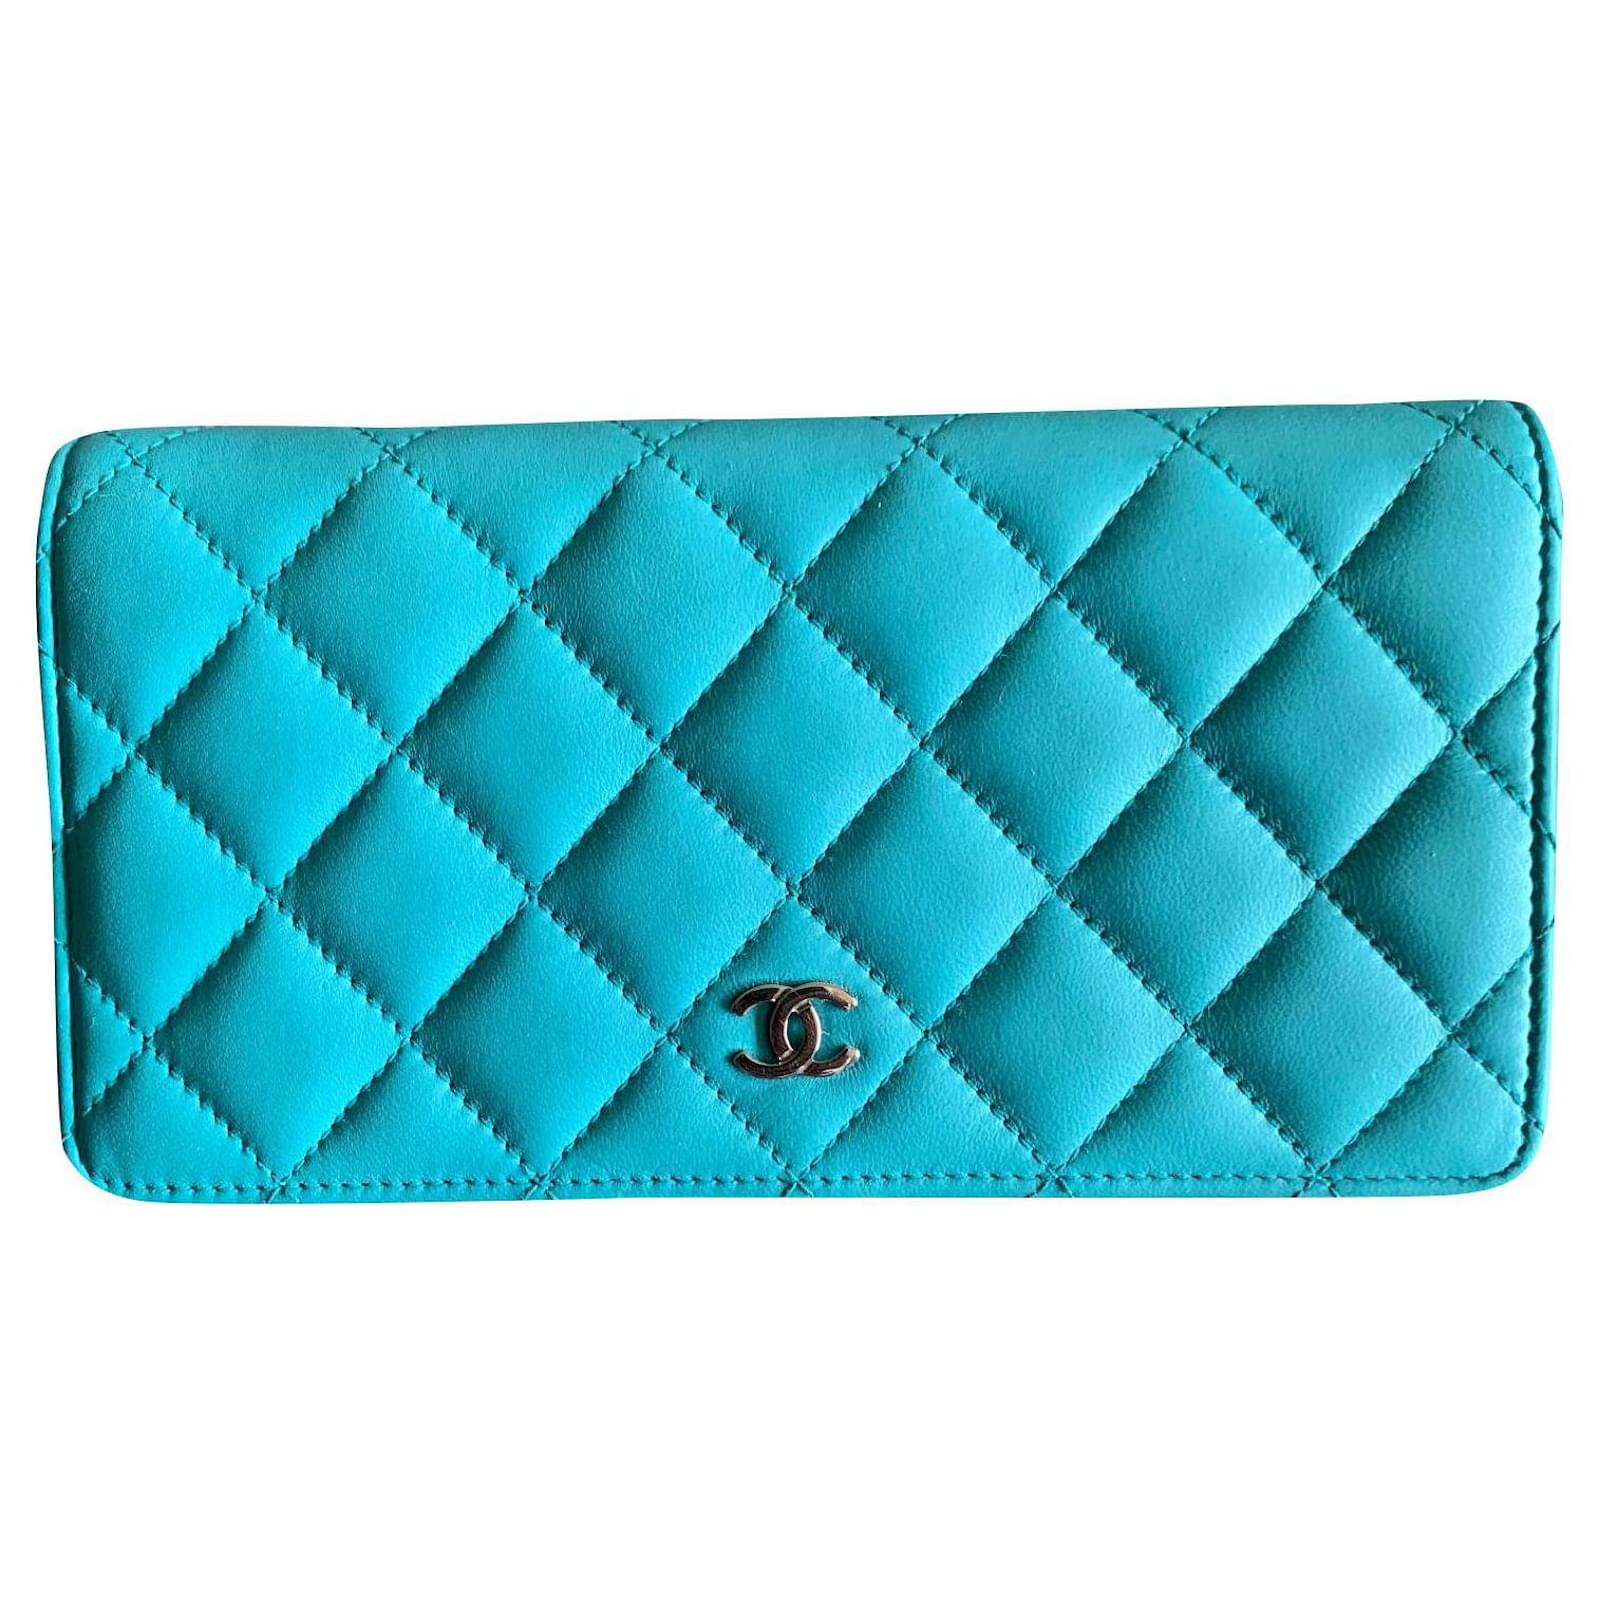 Timeless/classique leather wallet Chanel Turquoise in Leather